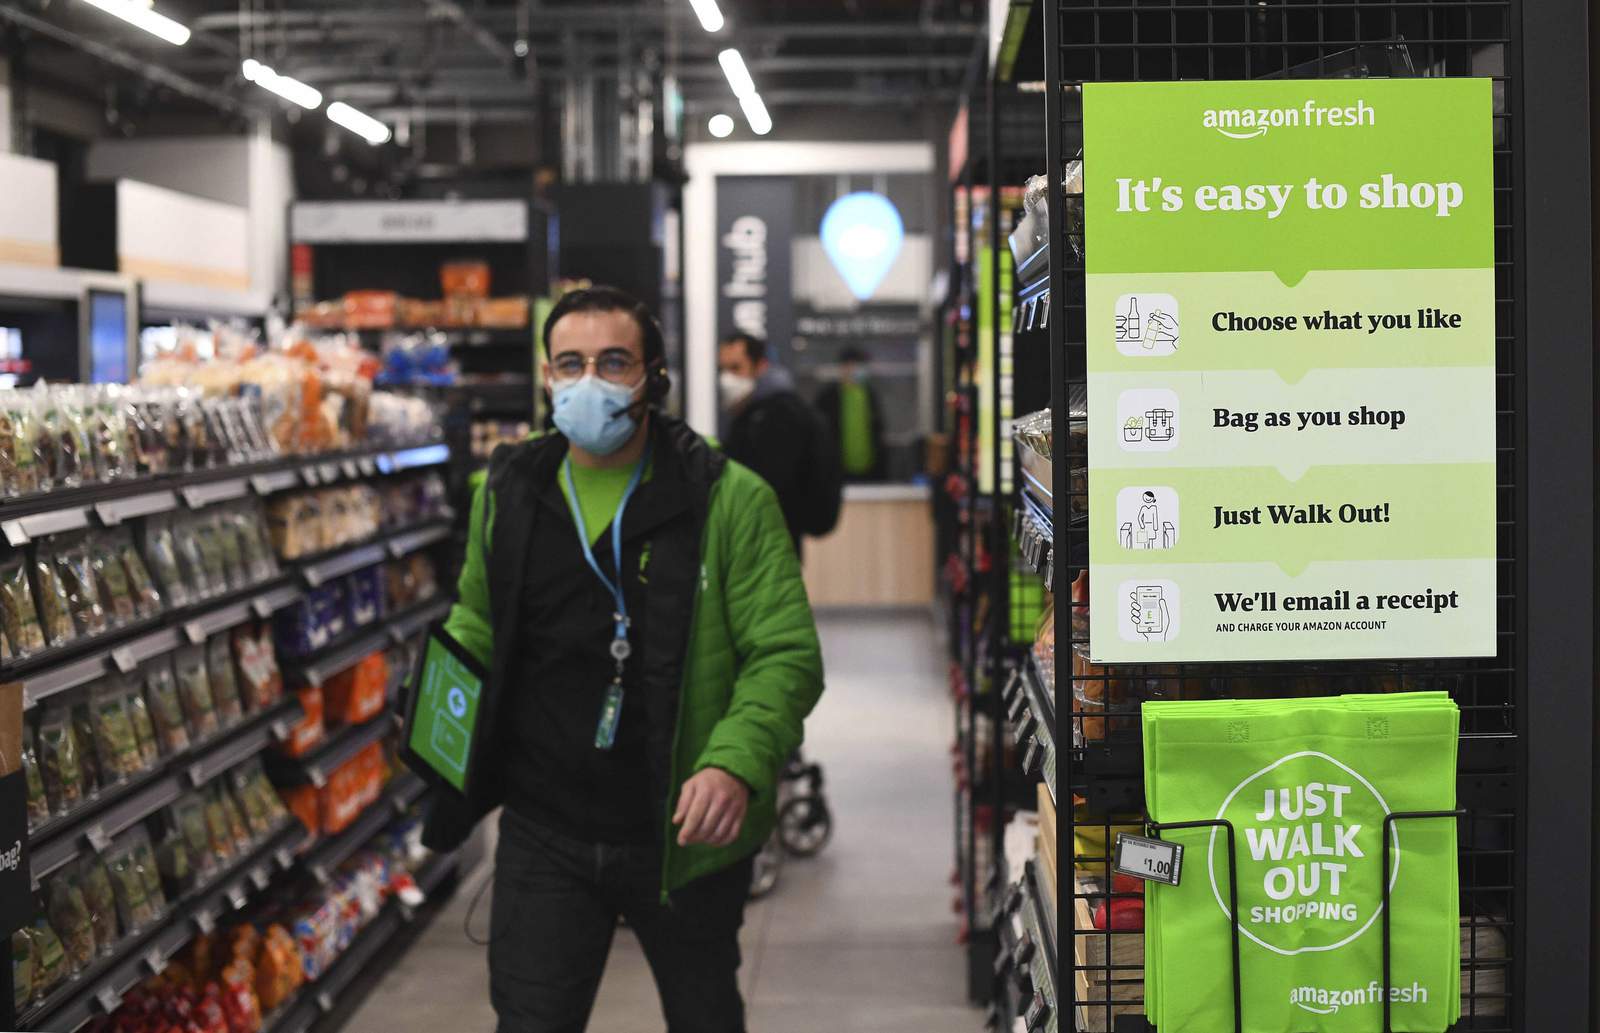 Amazon opens first UK checkout-free grocery store in London